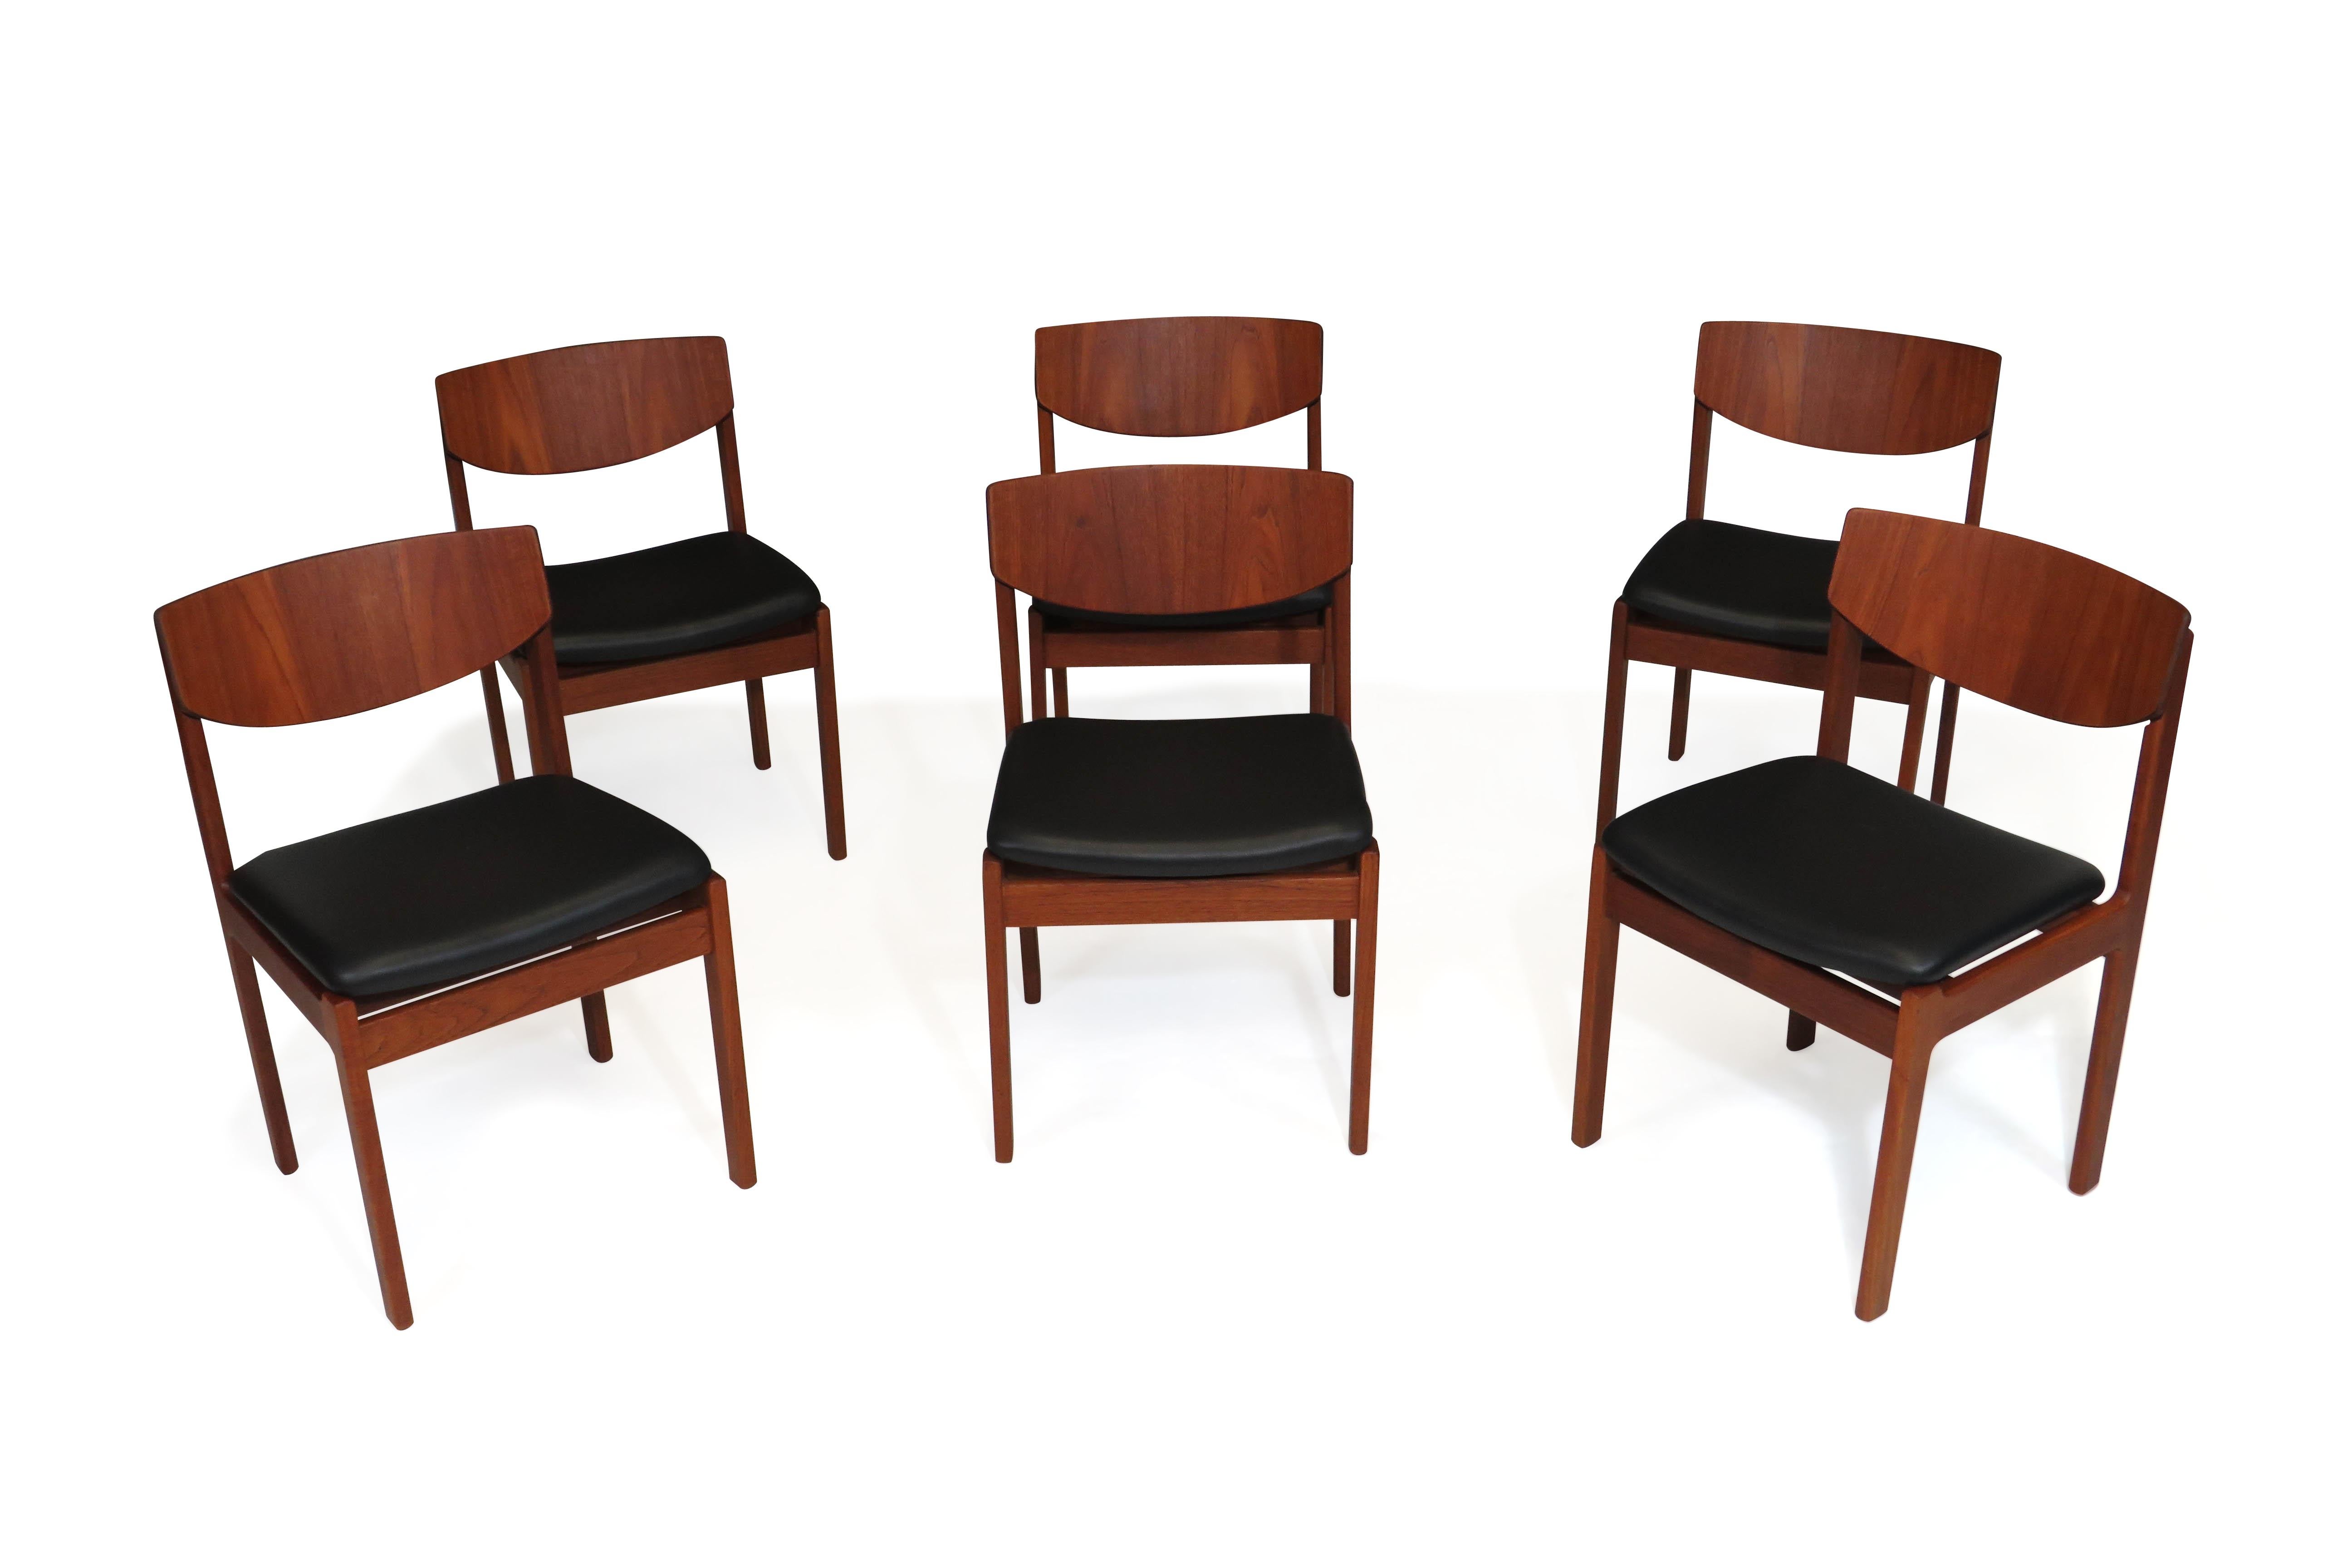 Danish Teak Dining Chairs in New Black Leather For Sale 4